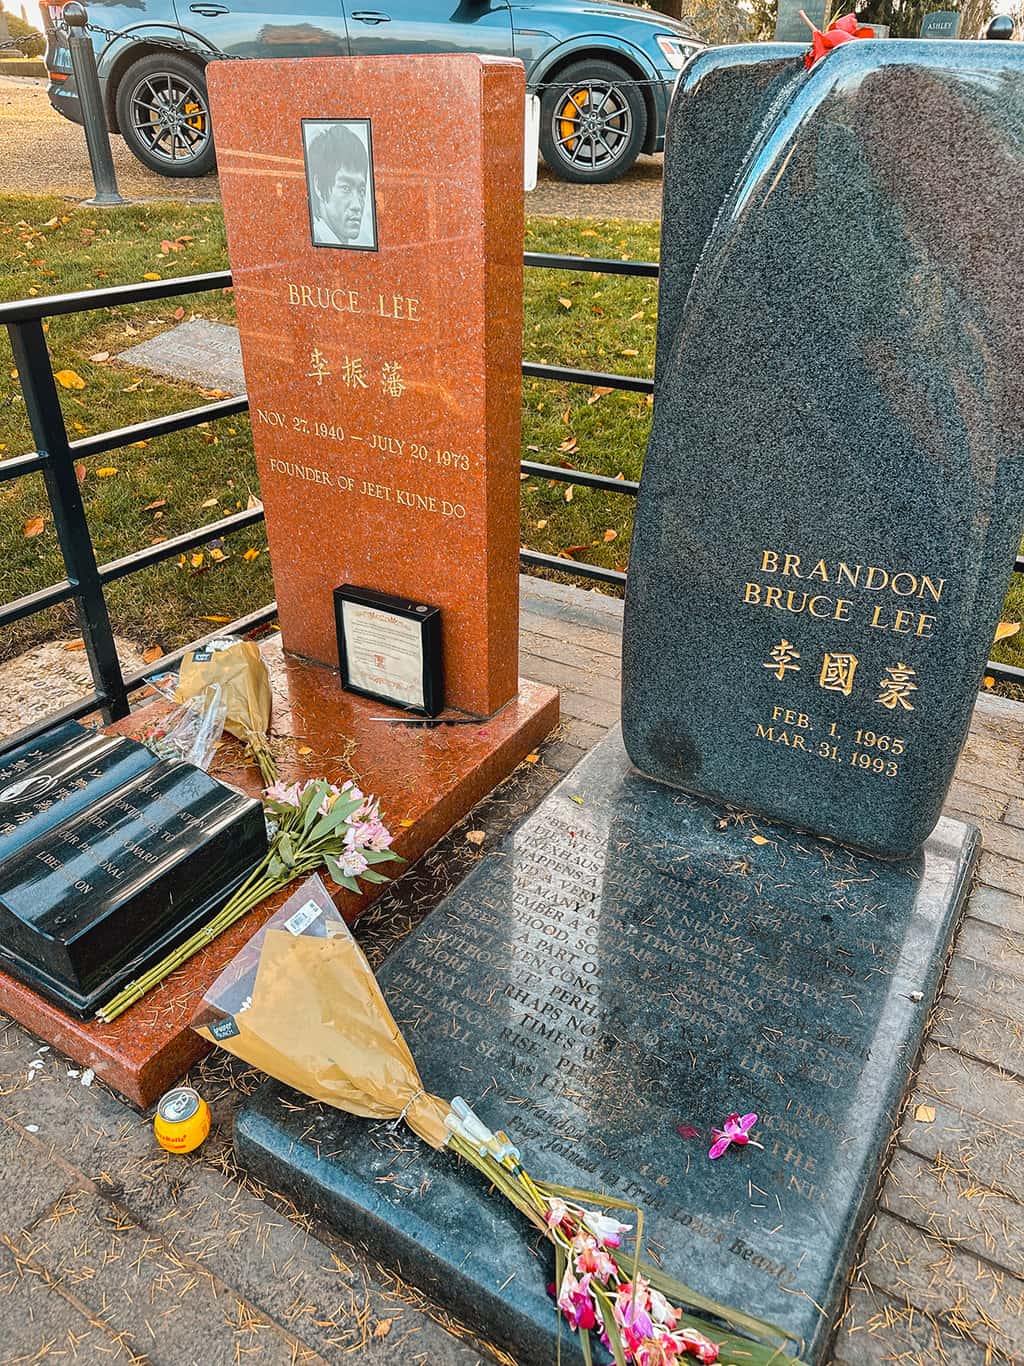 Detail of Brandon Lee's grave in Lakeview Cemetery in Seattle- Photo credit Keryn Means, a travel expert at TwistTravelMag.com